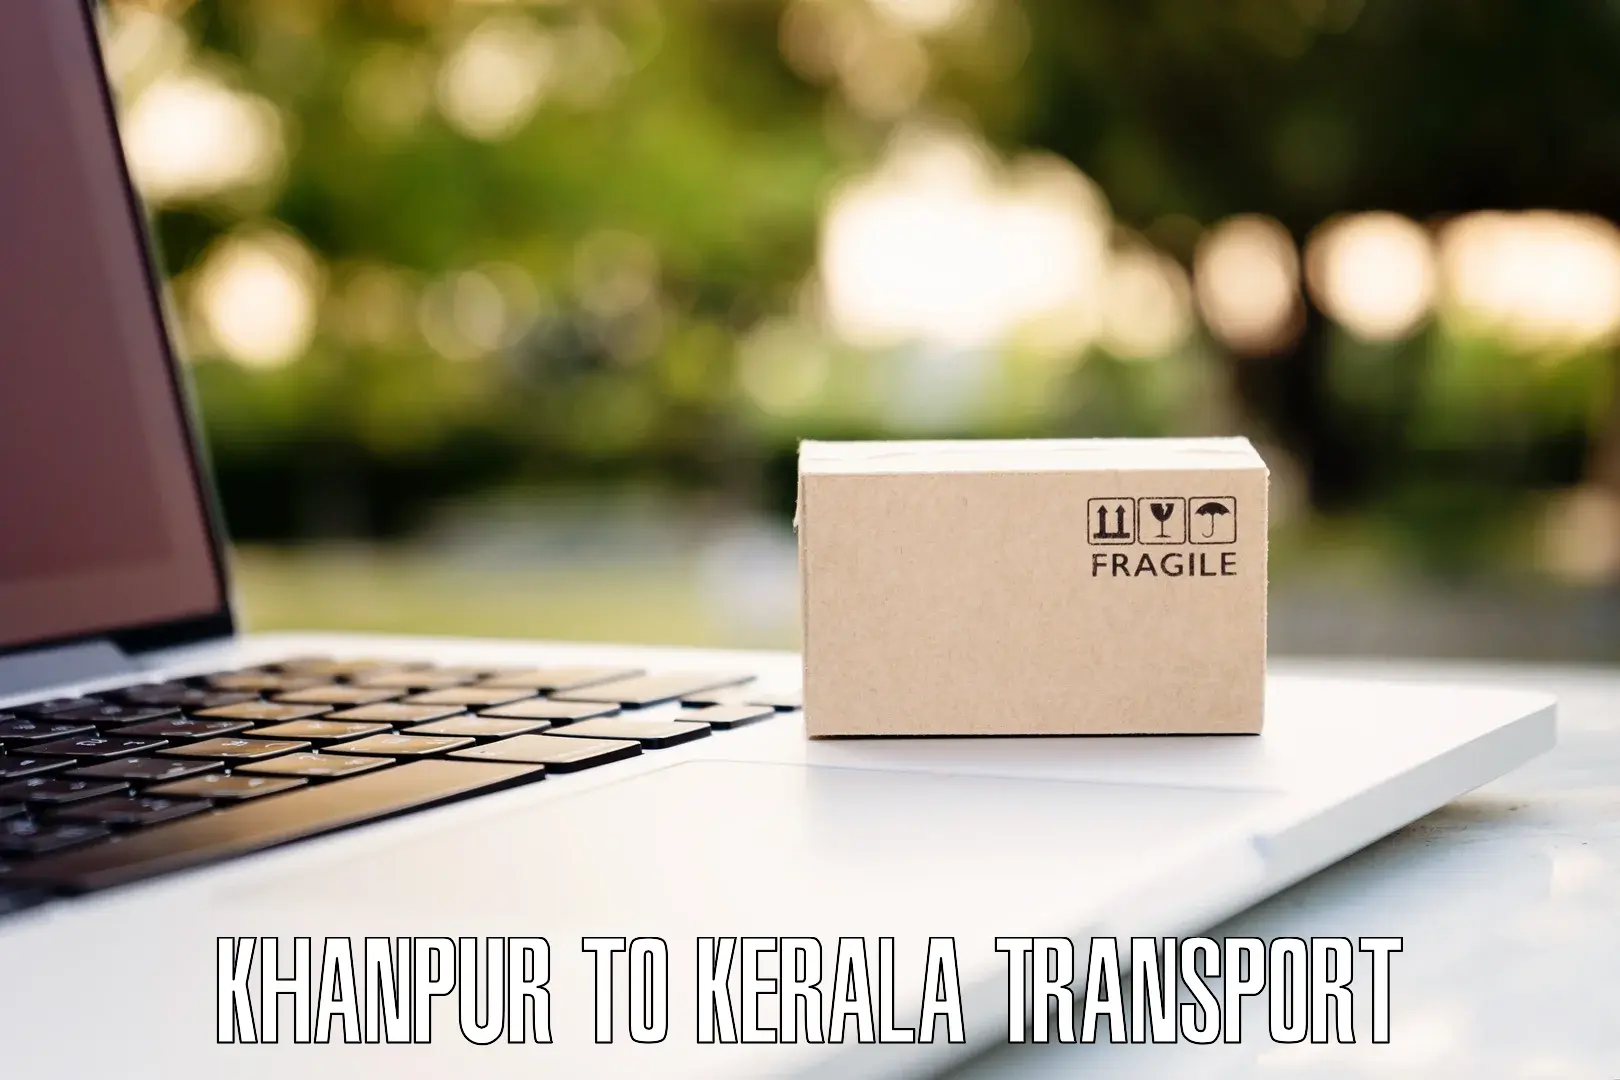 Nationwide transport services Khanpur to Ernakulam